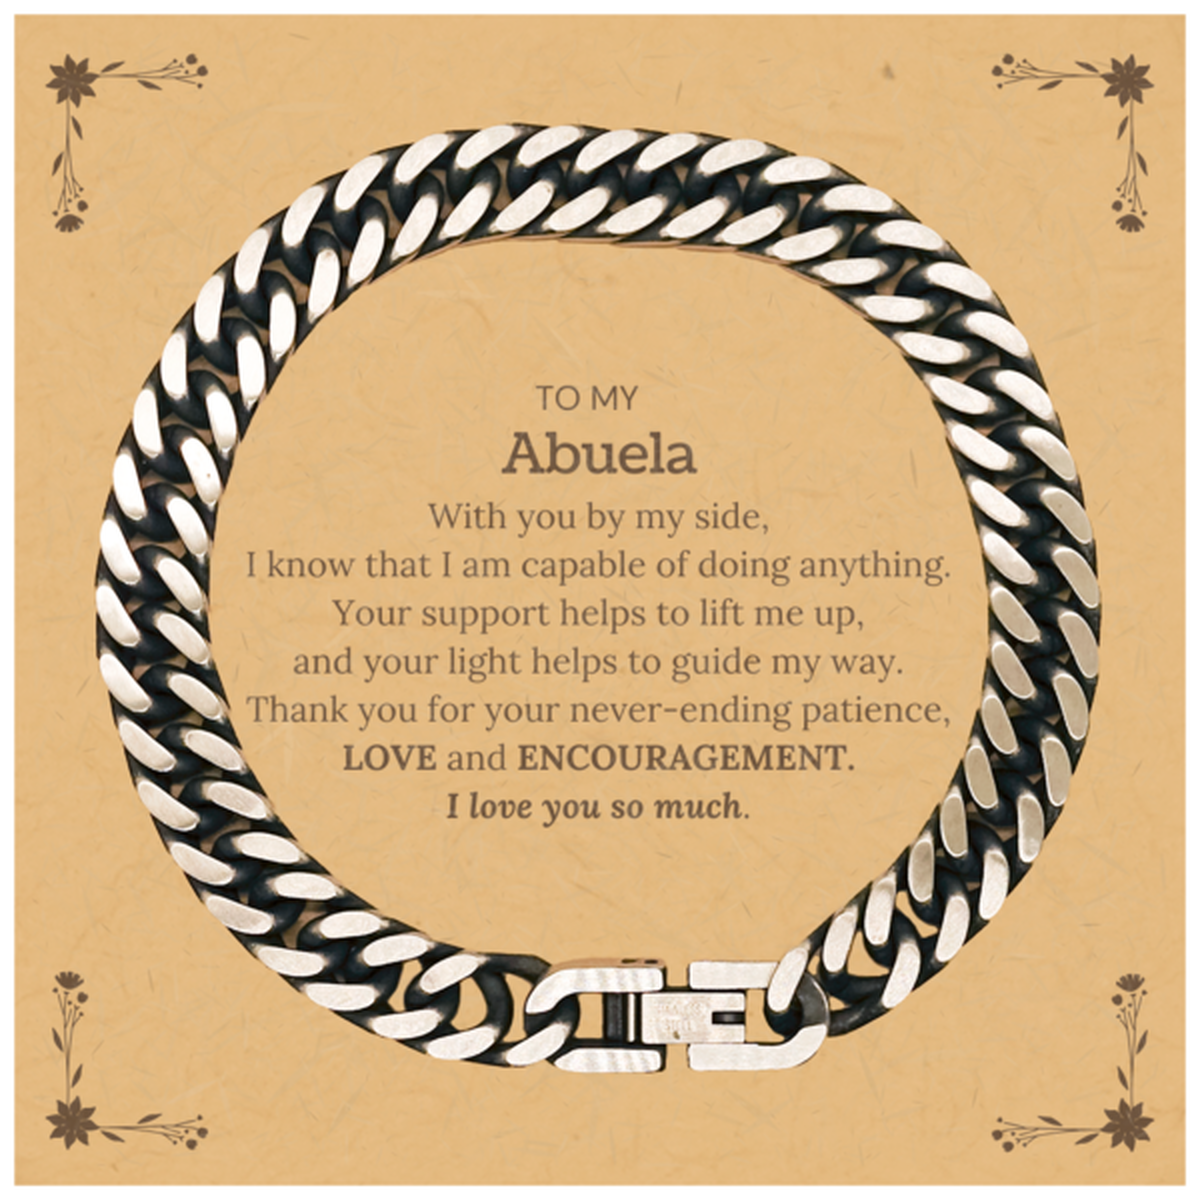 Appreciation Abuela Cuban Link Chain Bracelet Gifts, To My Abuela Birthday Christmas Wedding Keepsake Gifts for Abuela With you by my side, I know that I am capable of doing anything. I love you so much